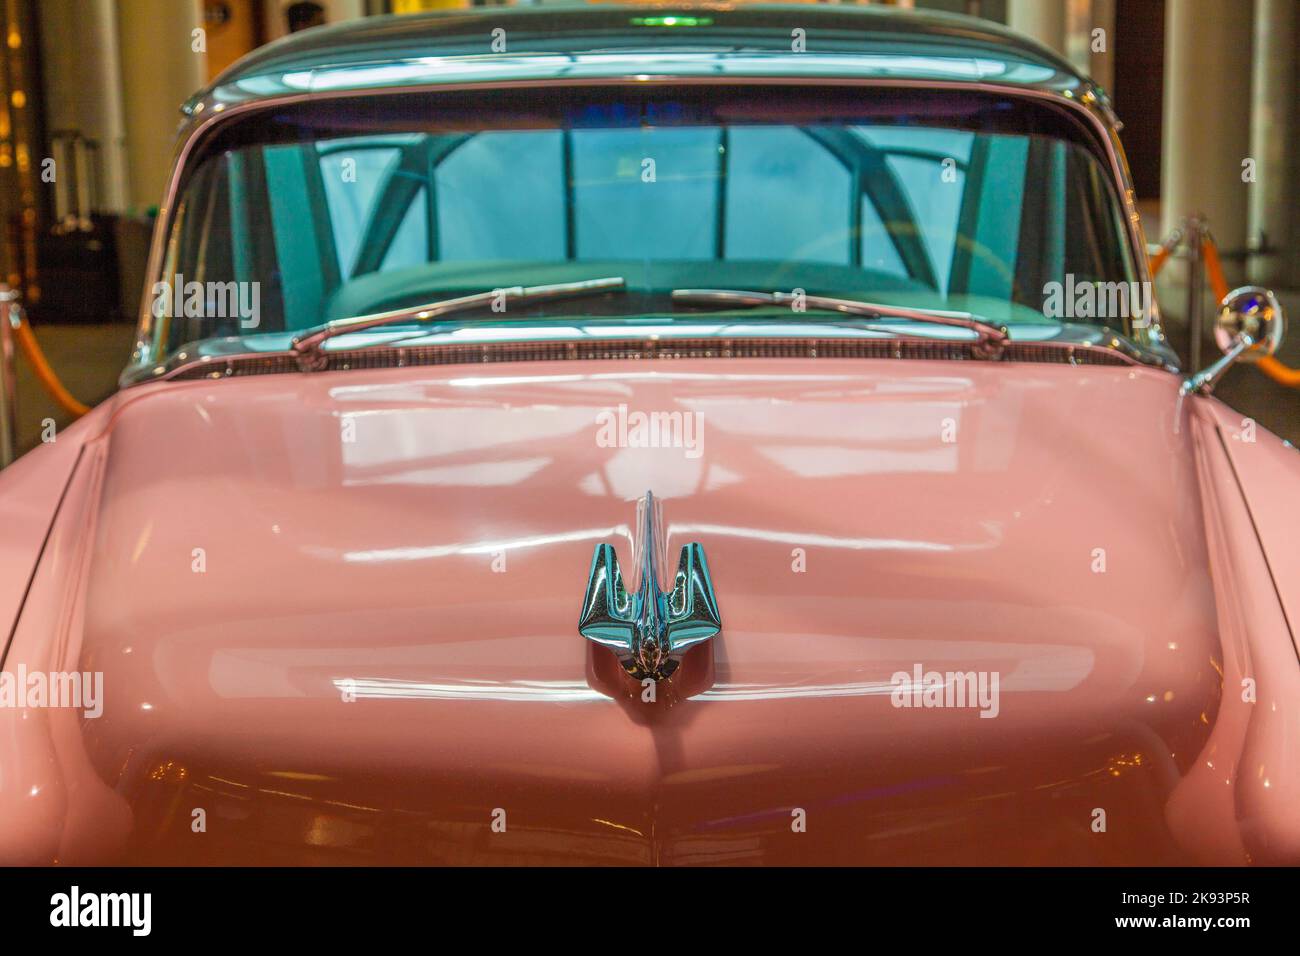 FRANKFURT, GERMANY - JUNE 8:  pink 1956 Cadillac at the airport on June 8, 2012 in Frankfurt, Germany. It belongs to the museum of Sinsheim with more Stock Photo